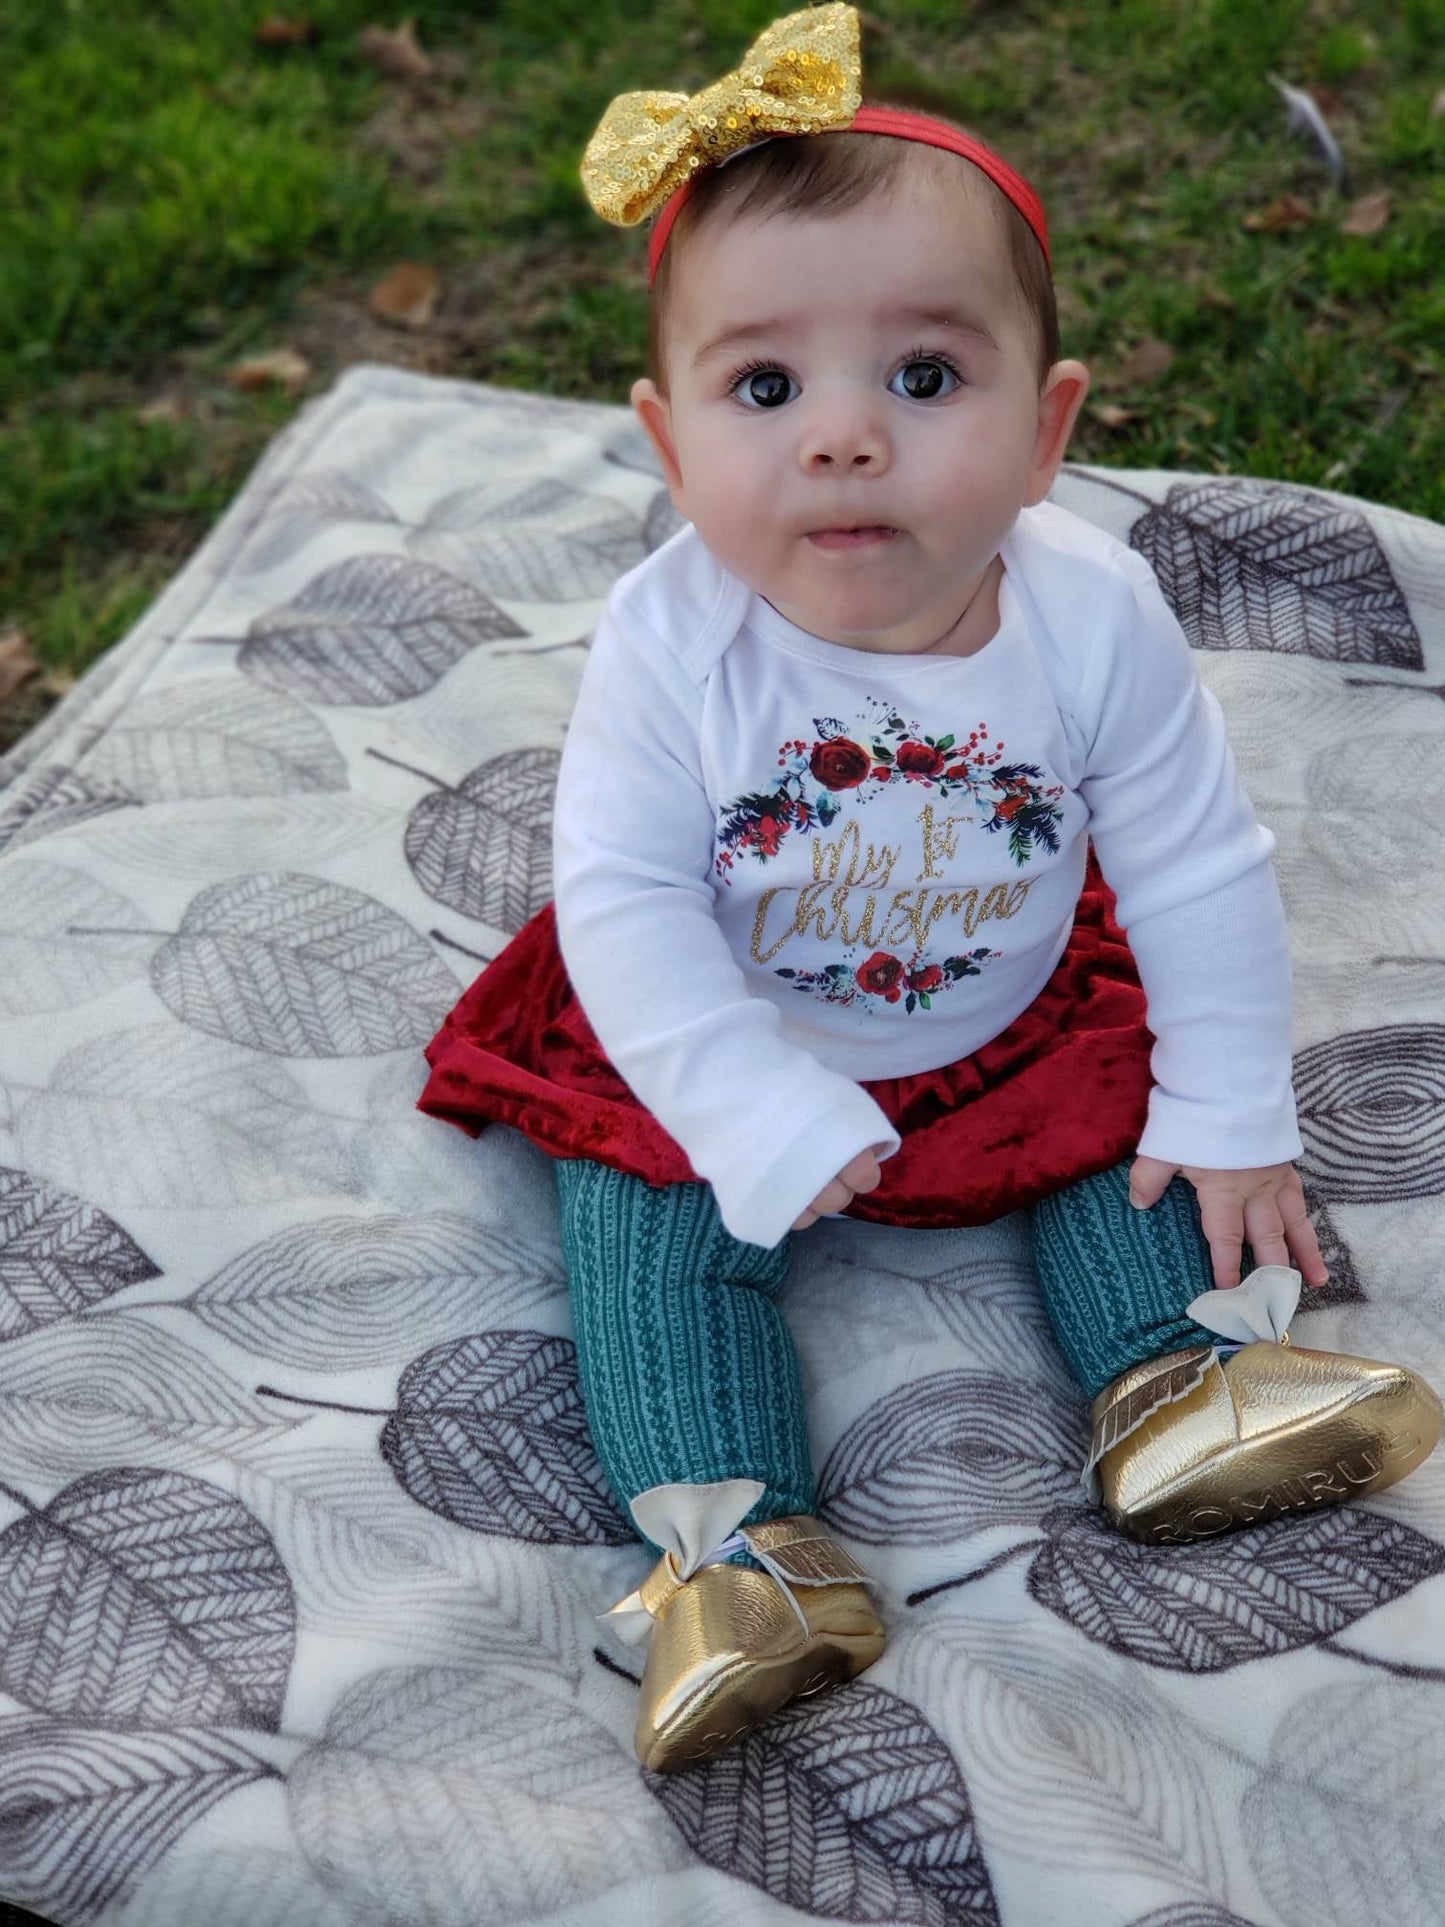 Girl's Merry Christmas Outfit - Squishy Cheeks